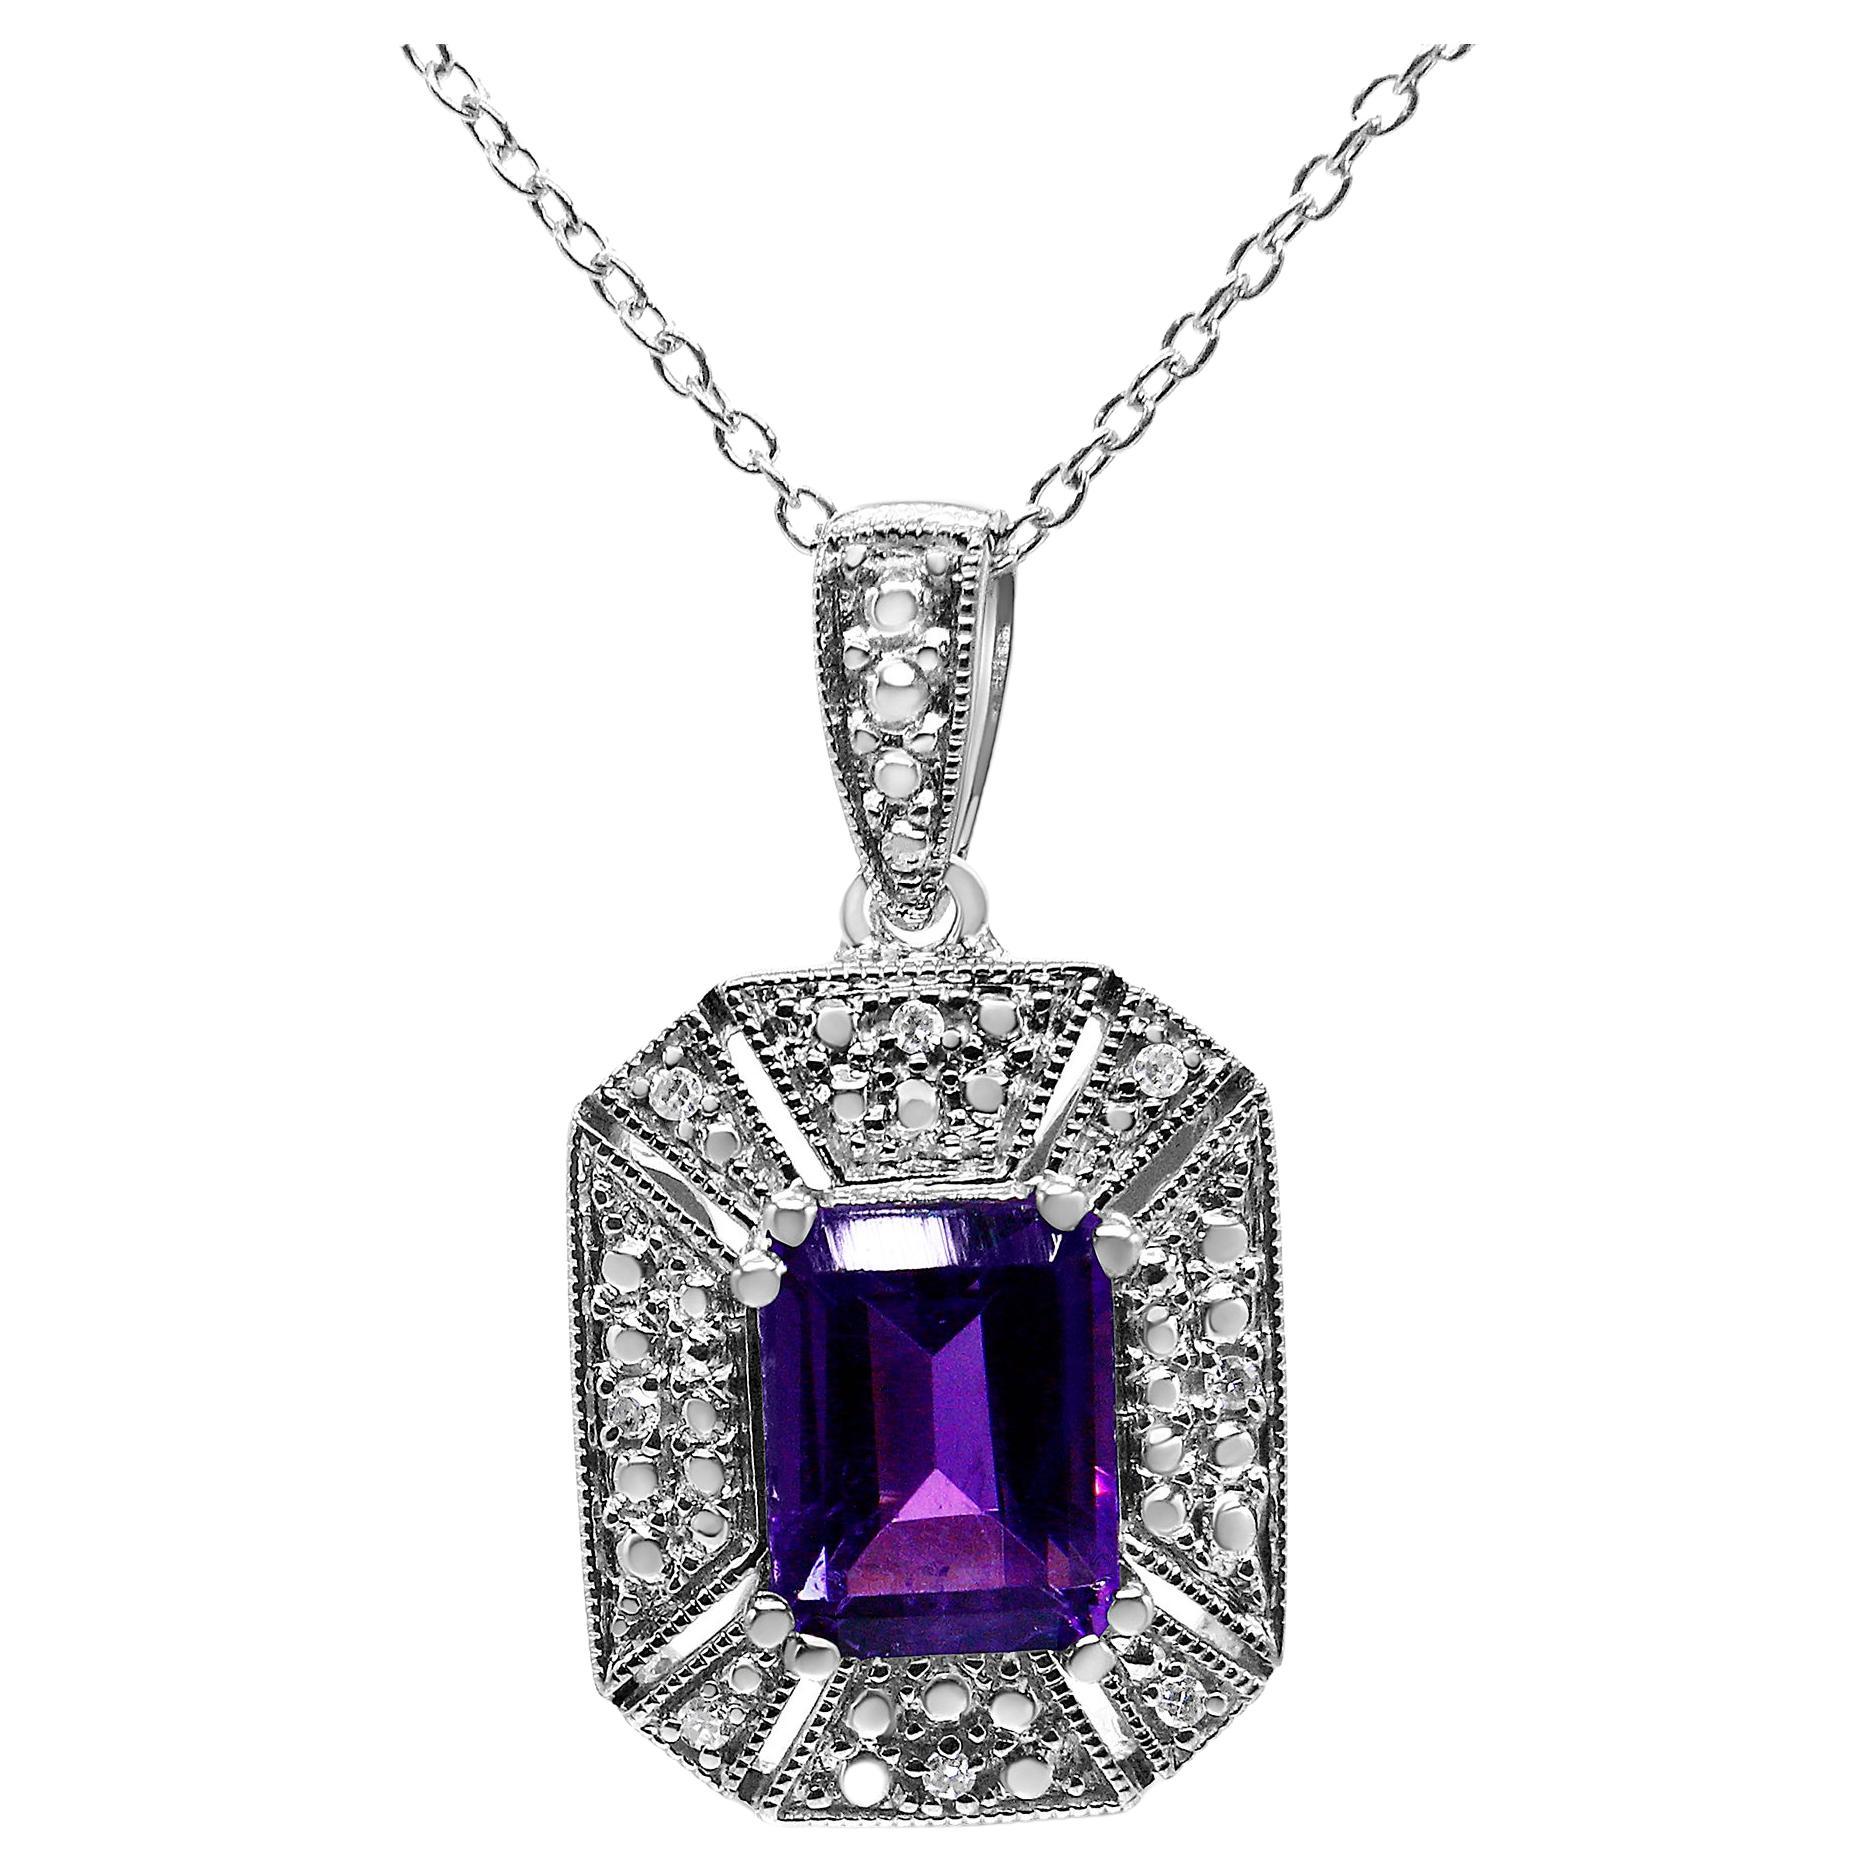  .925 Sterling Silver Purple Amethyst and Diamond Accent Pendant Necklace  For Sale